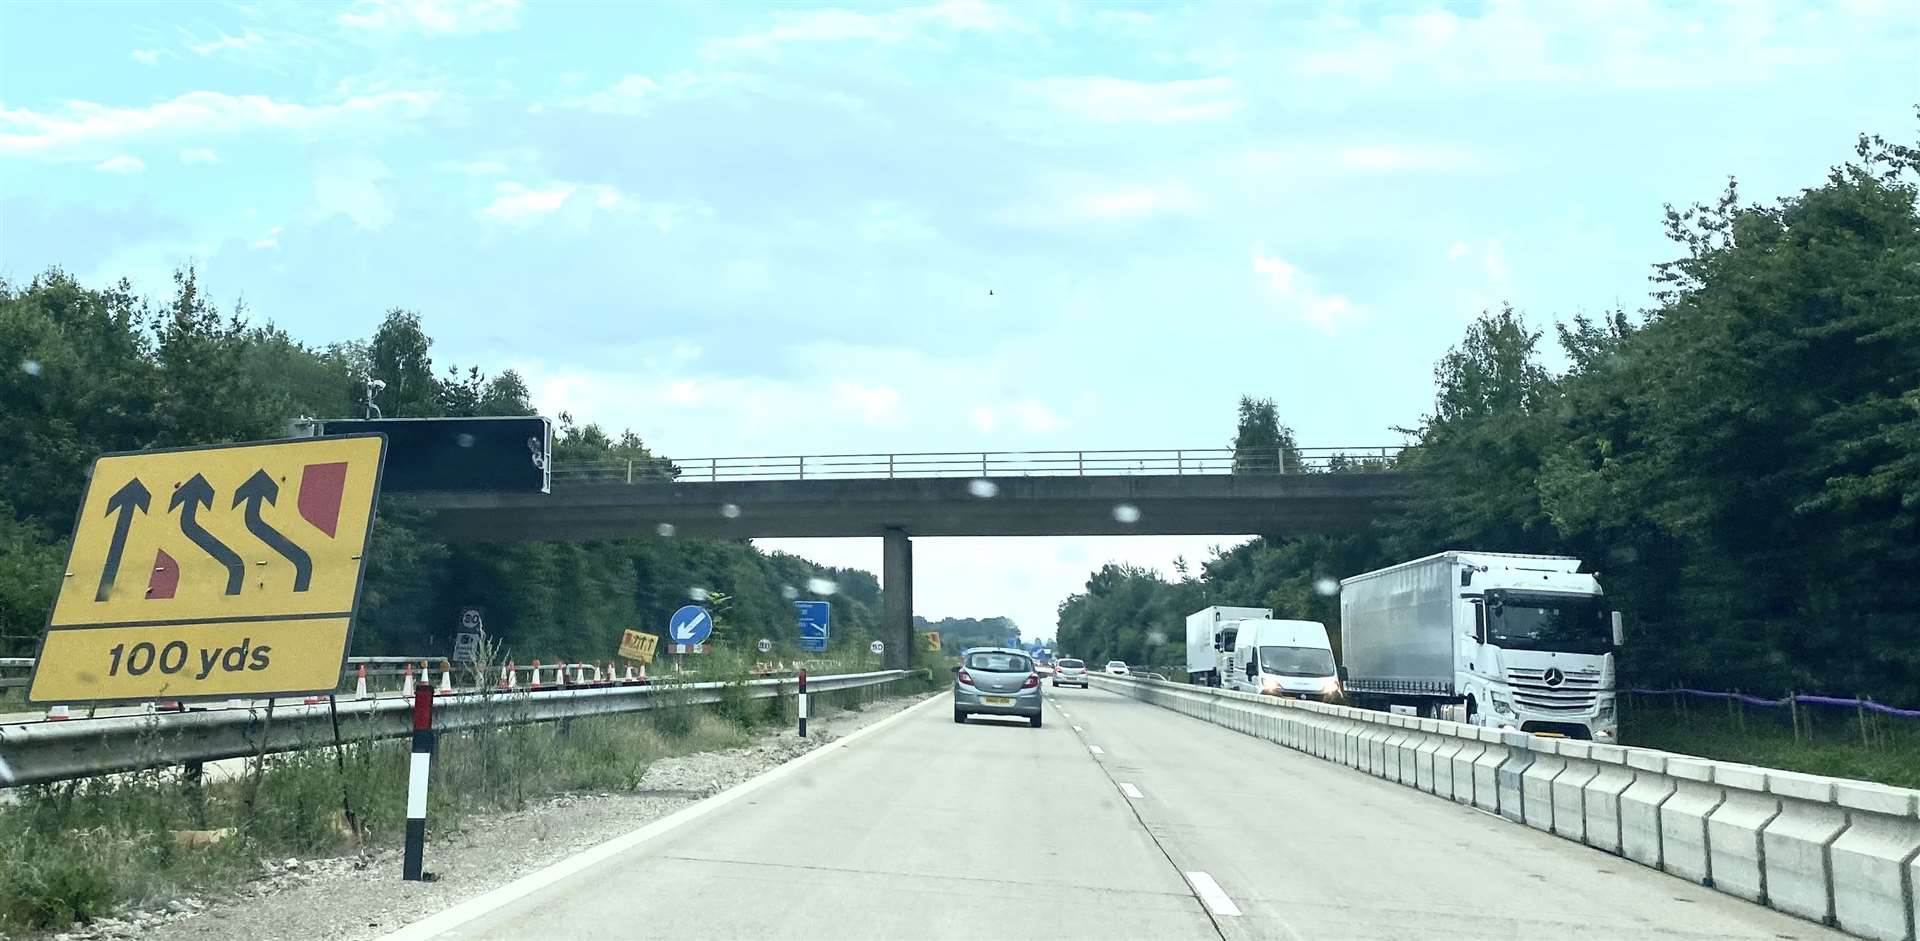 Operation Brock covers a 16-mile stretch of the M20 between Ashford and Maidstone